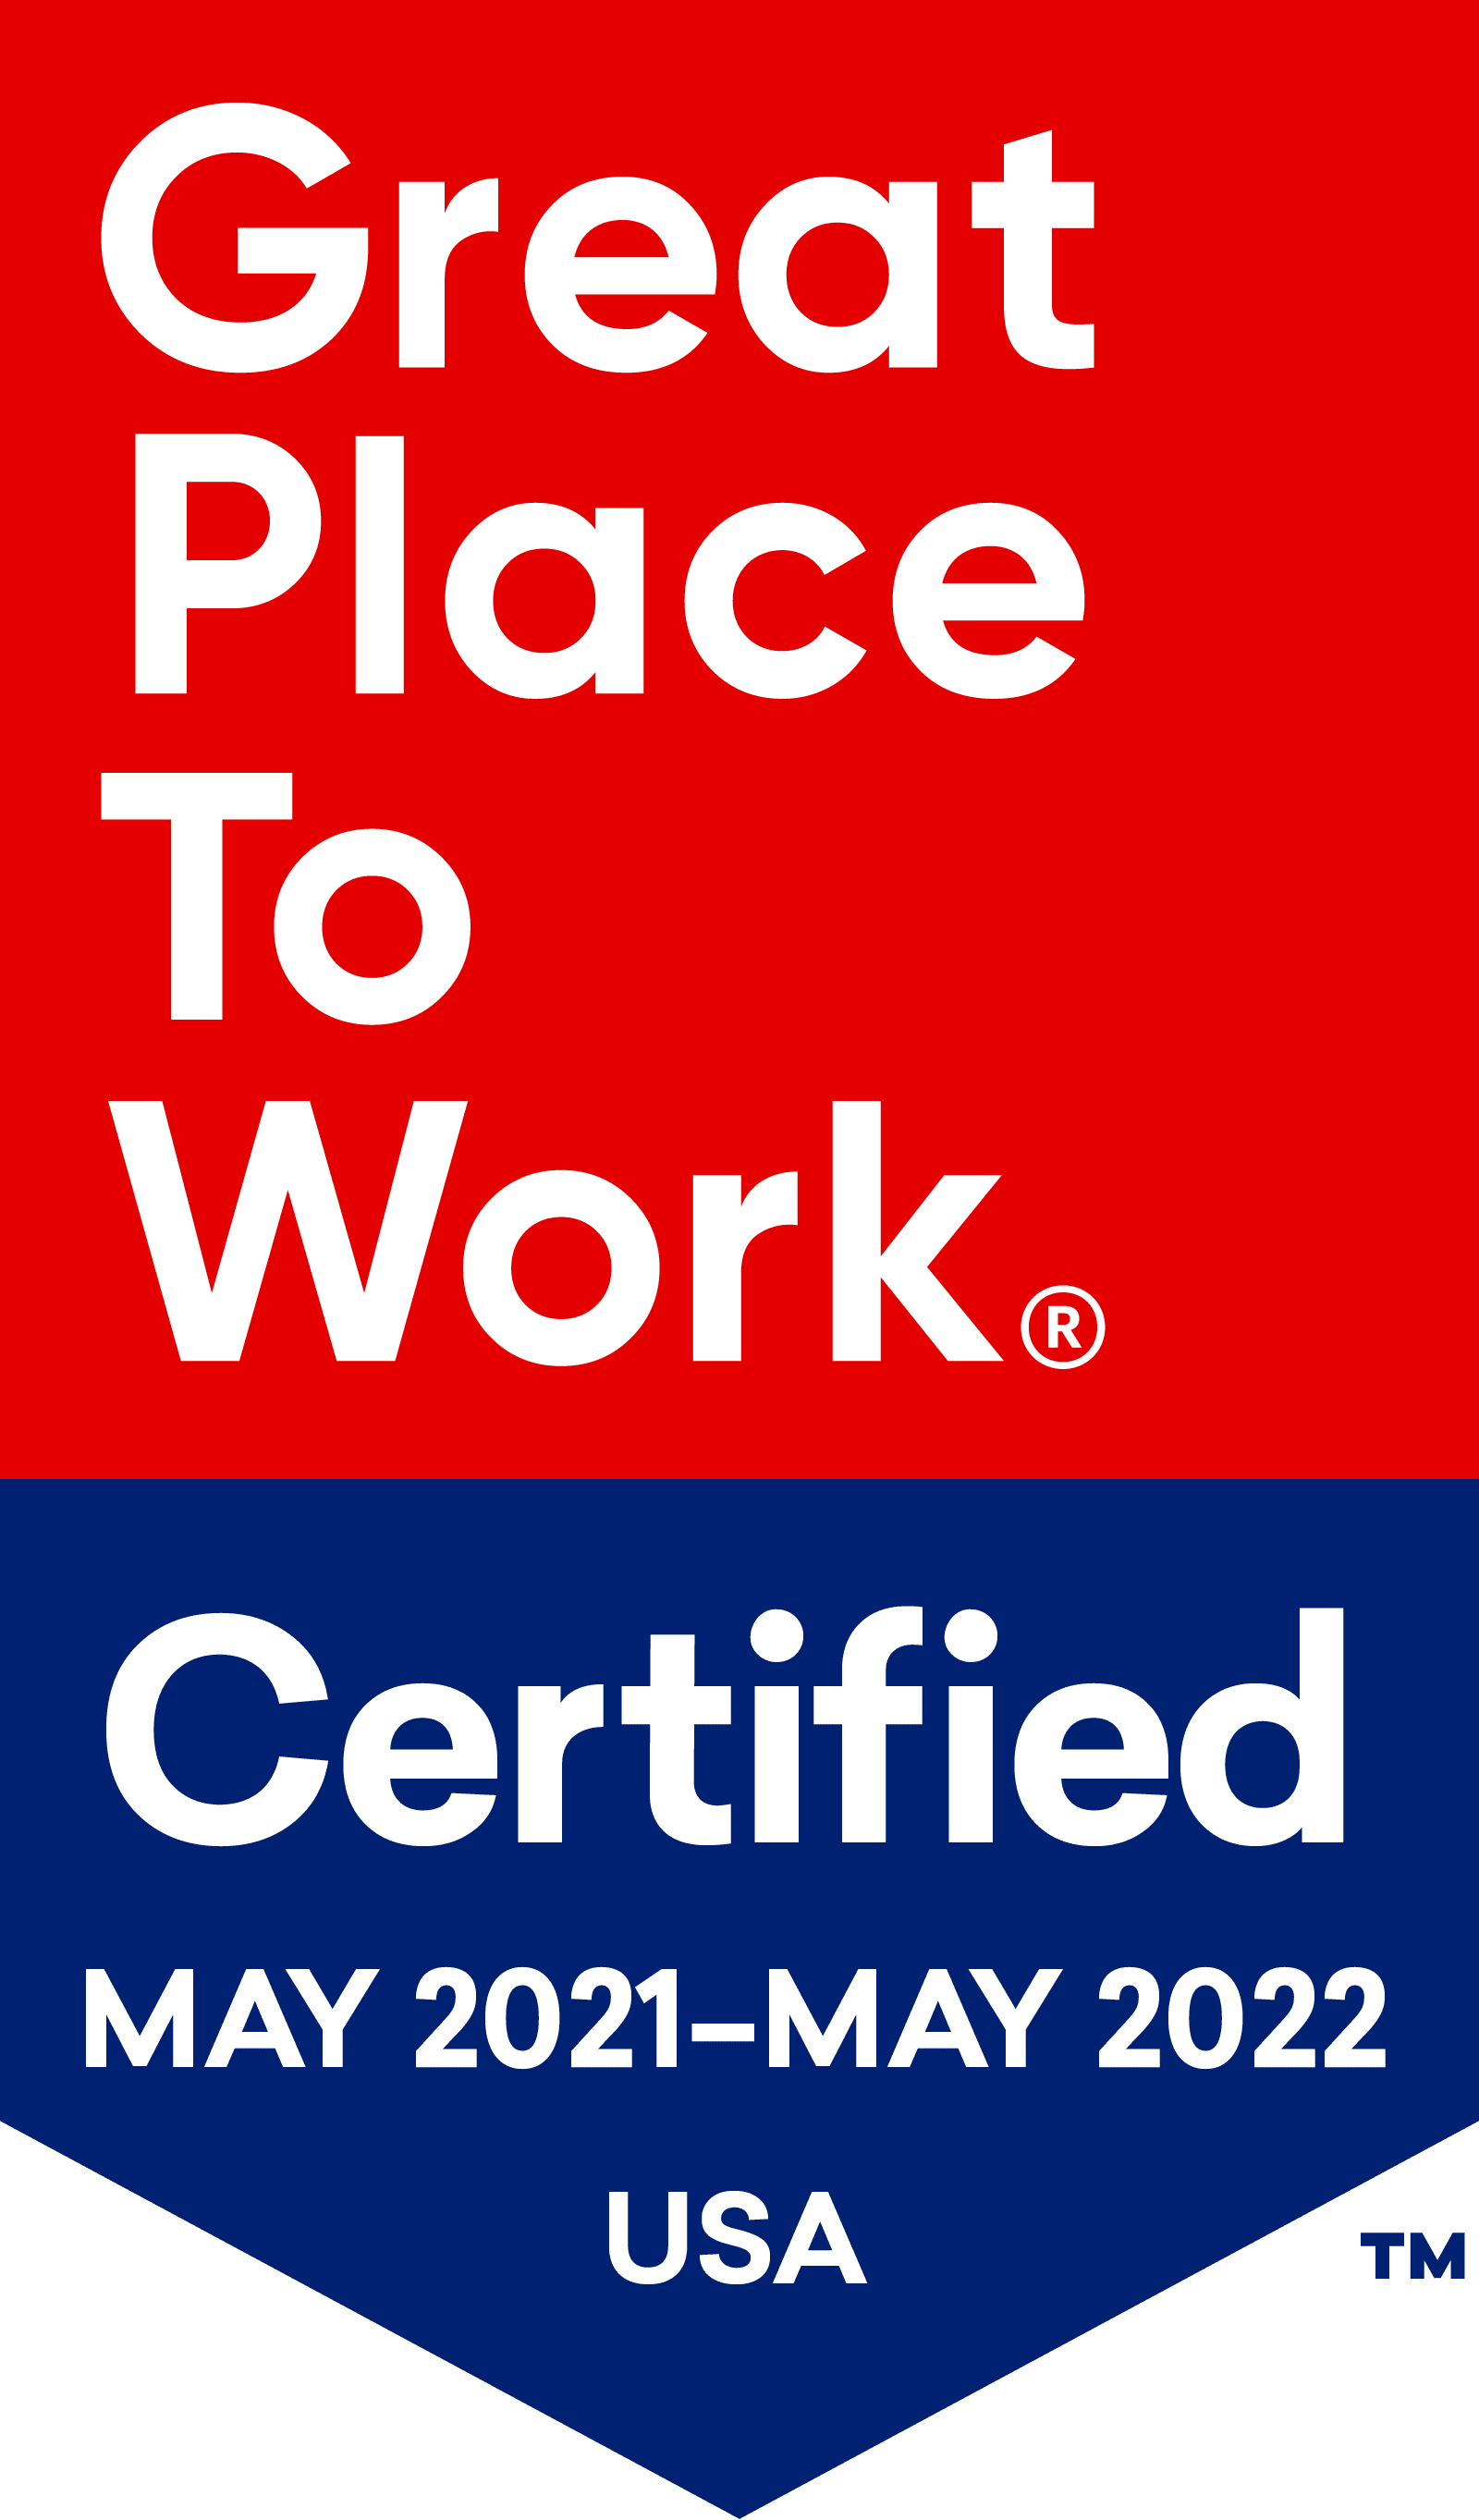 Sky Vista is Great Place To Work Certified